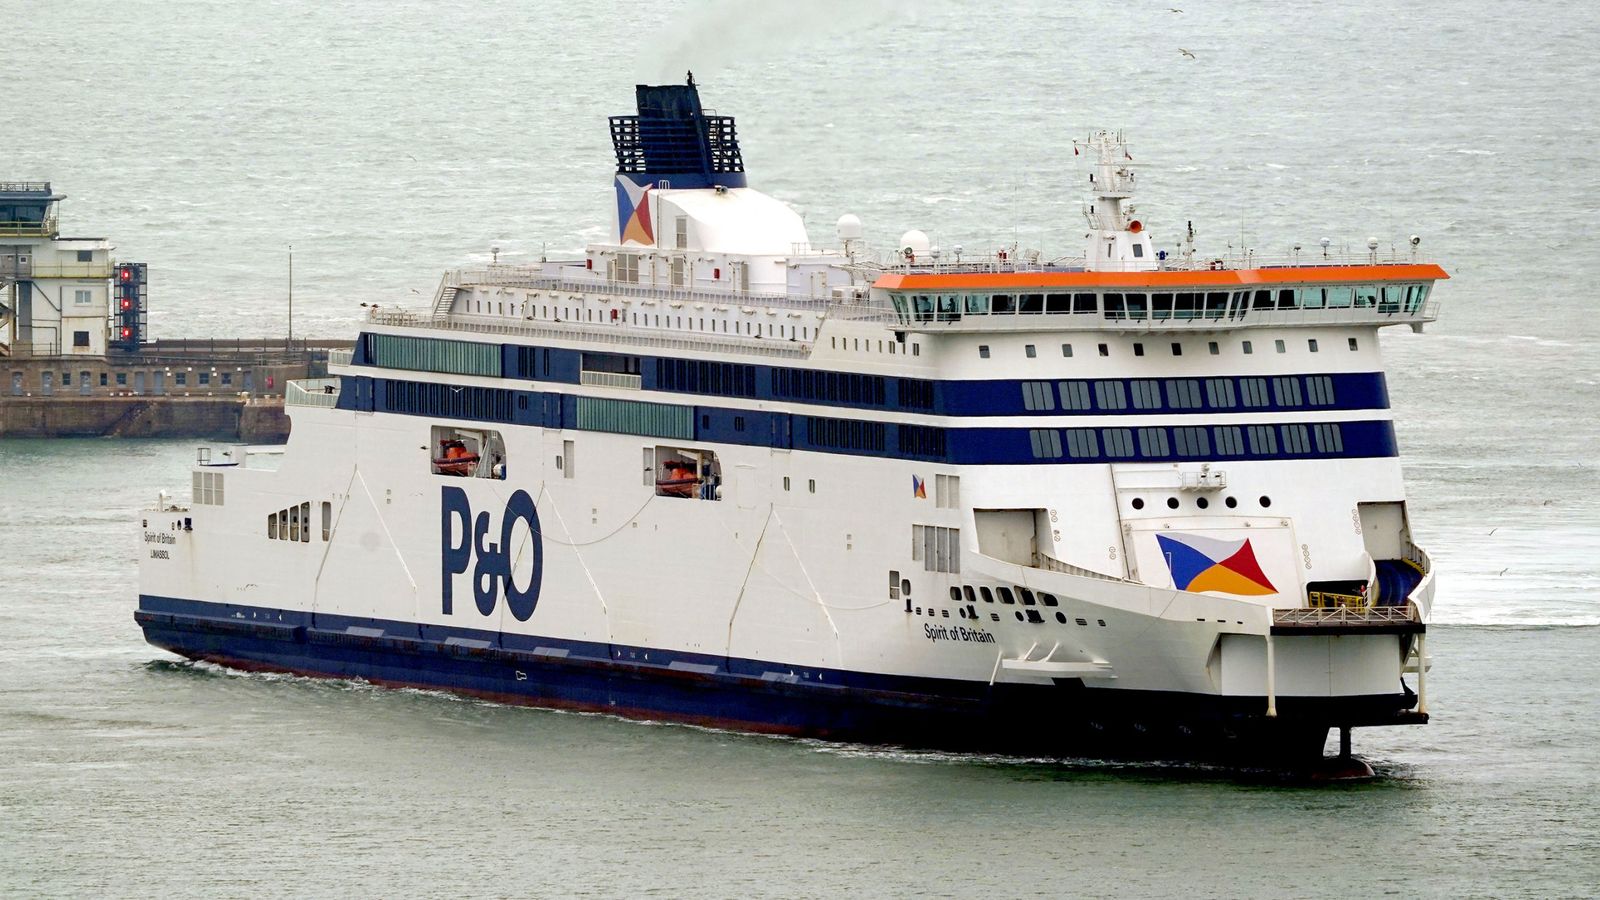 P&O Ferries chief executive Peter Hebblethwaite says he couldn't live on £4.87-per-hour staff pay